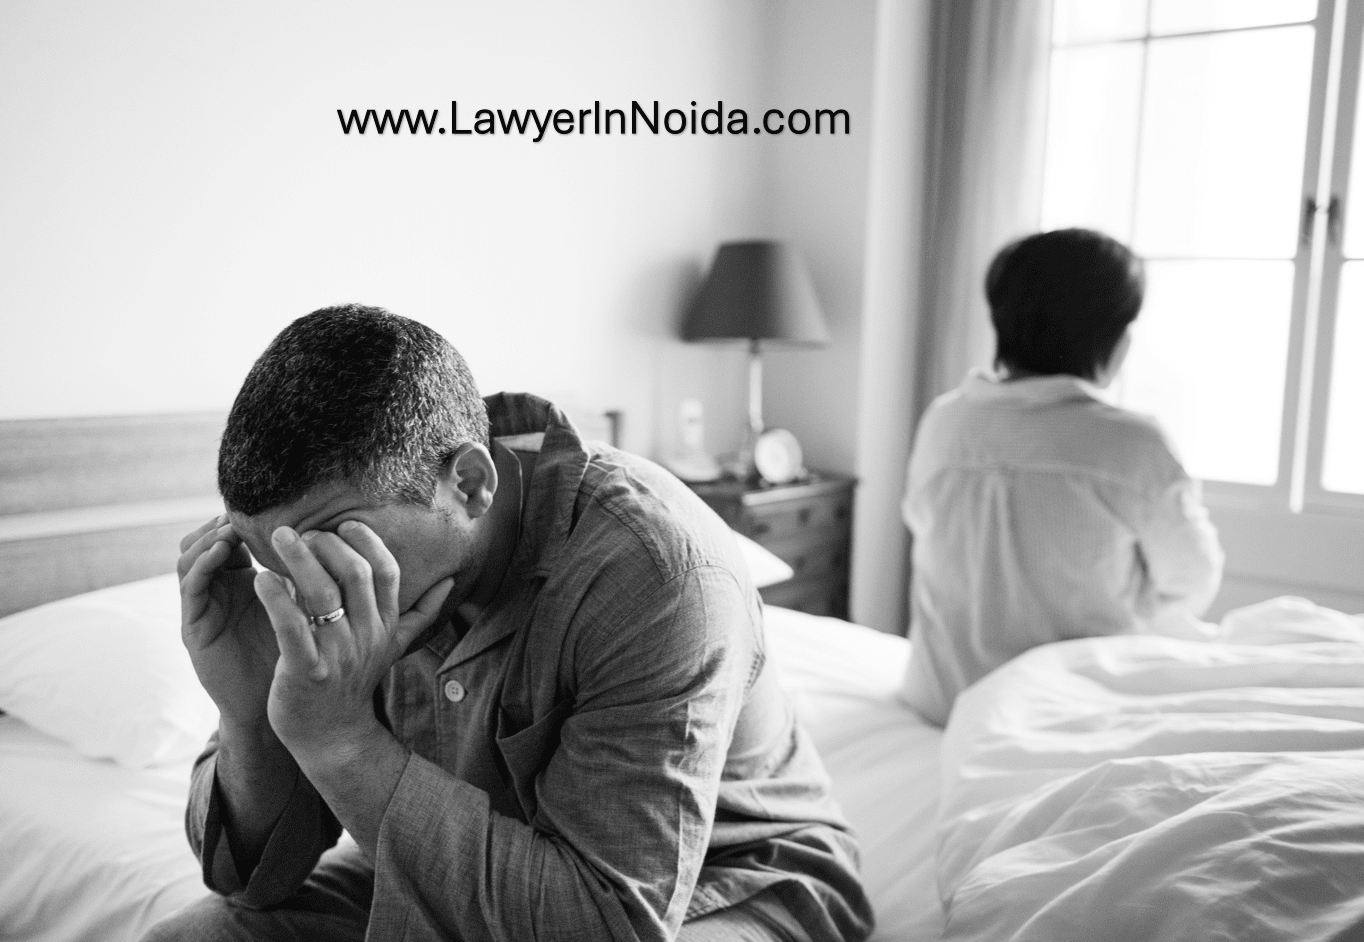 Premier Contested Divorce Lawyer Serving Noida: Your Trusted Legal Advocate - Delhi Lawyer